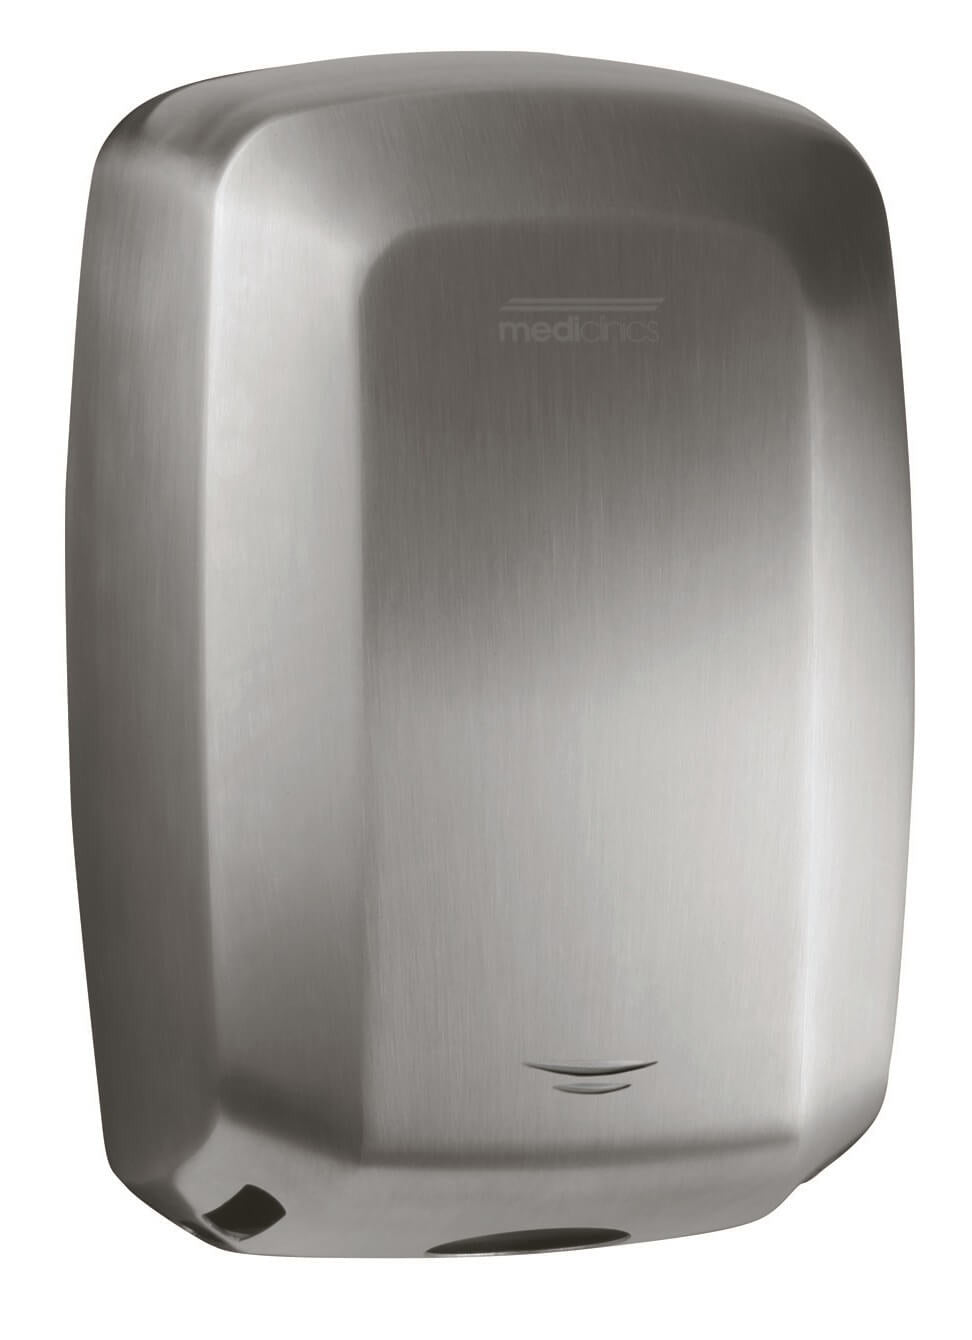 2022 Review – Mediclinics Machflow Brushless Hand Dryer M19A